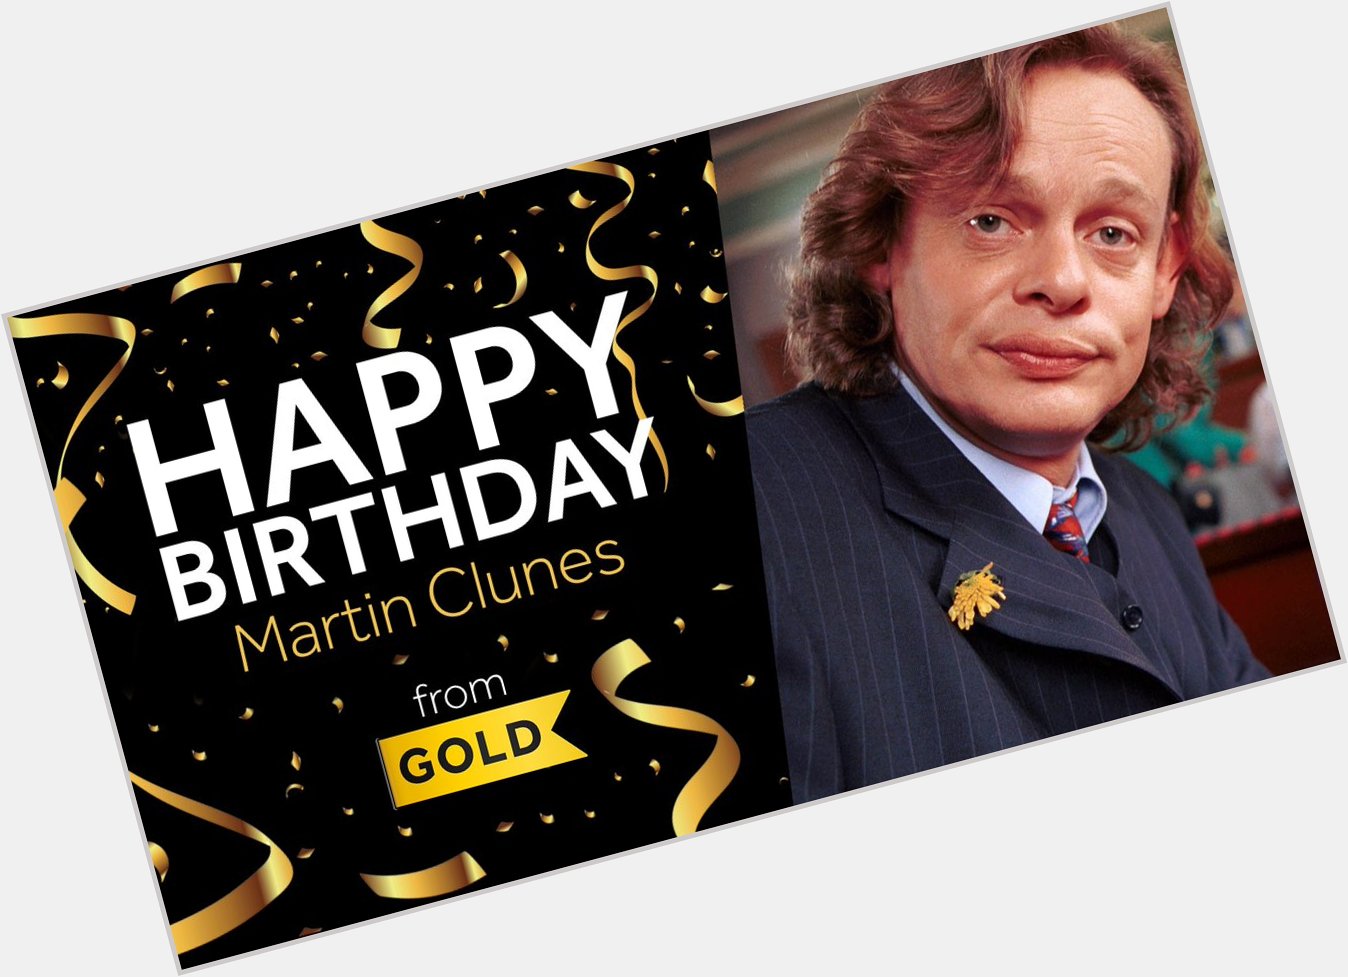 He spent 6 years as a man behaving badly, so the least we can do is wish Martin Clunes a very Happy Birthday! 